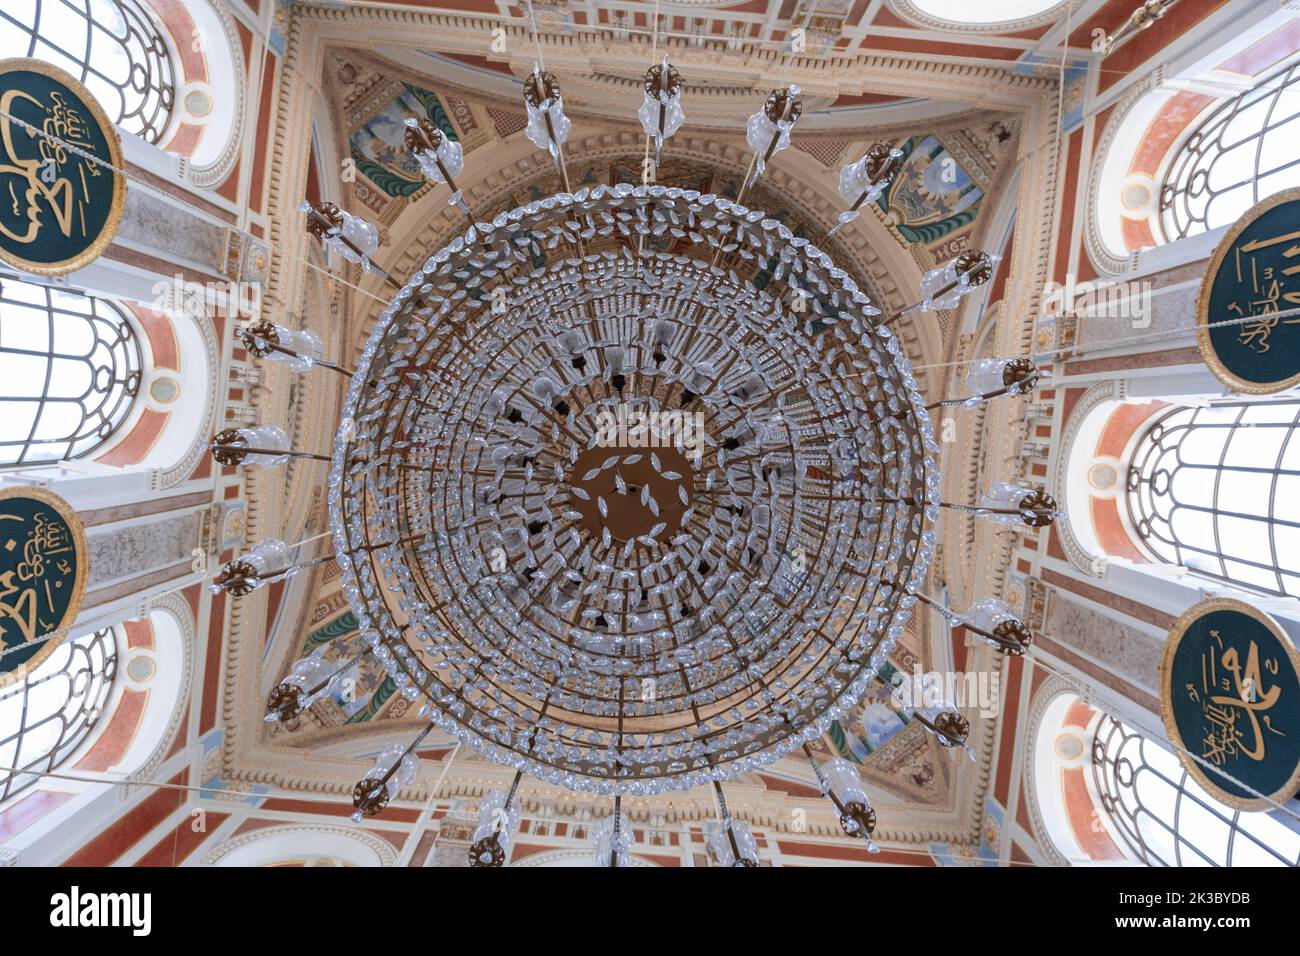 Beautiful dome with chandelier in Ortakoy Mosque, Interior of Ortakoy Mosque, Islamic ancient structure in Istanbul, dome with mosaic and decorations Stock Photo